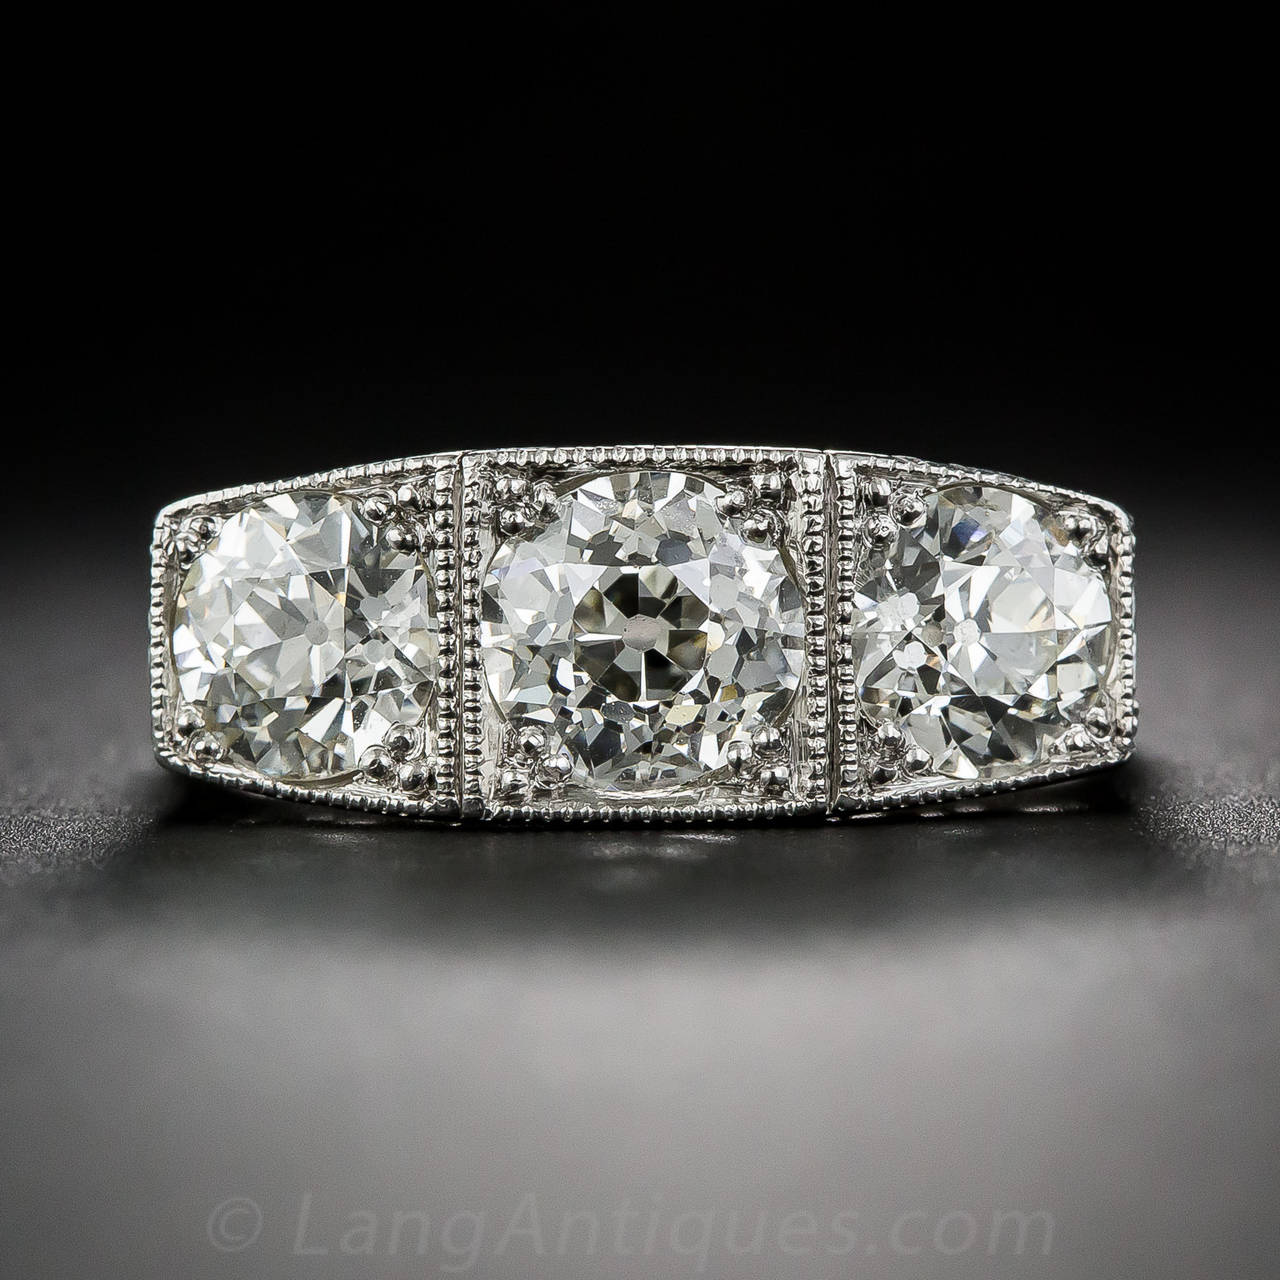 A dazzling Art Deco three-stone ring, crisply die-struck and hand detailed in platinum - circa 1925. This consummate Jazz Age jewel features a seductively sparkling trio of old European-cut diamonds which curve across your finger in a continuous